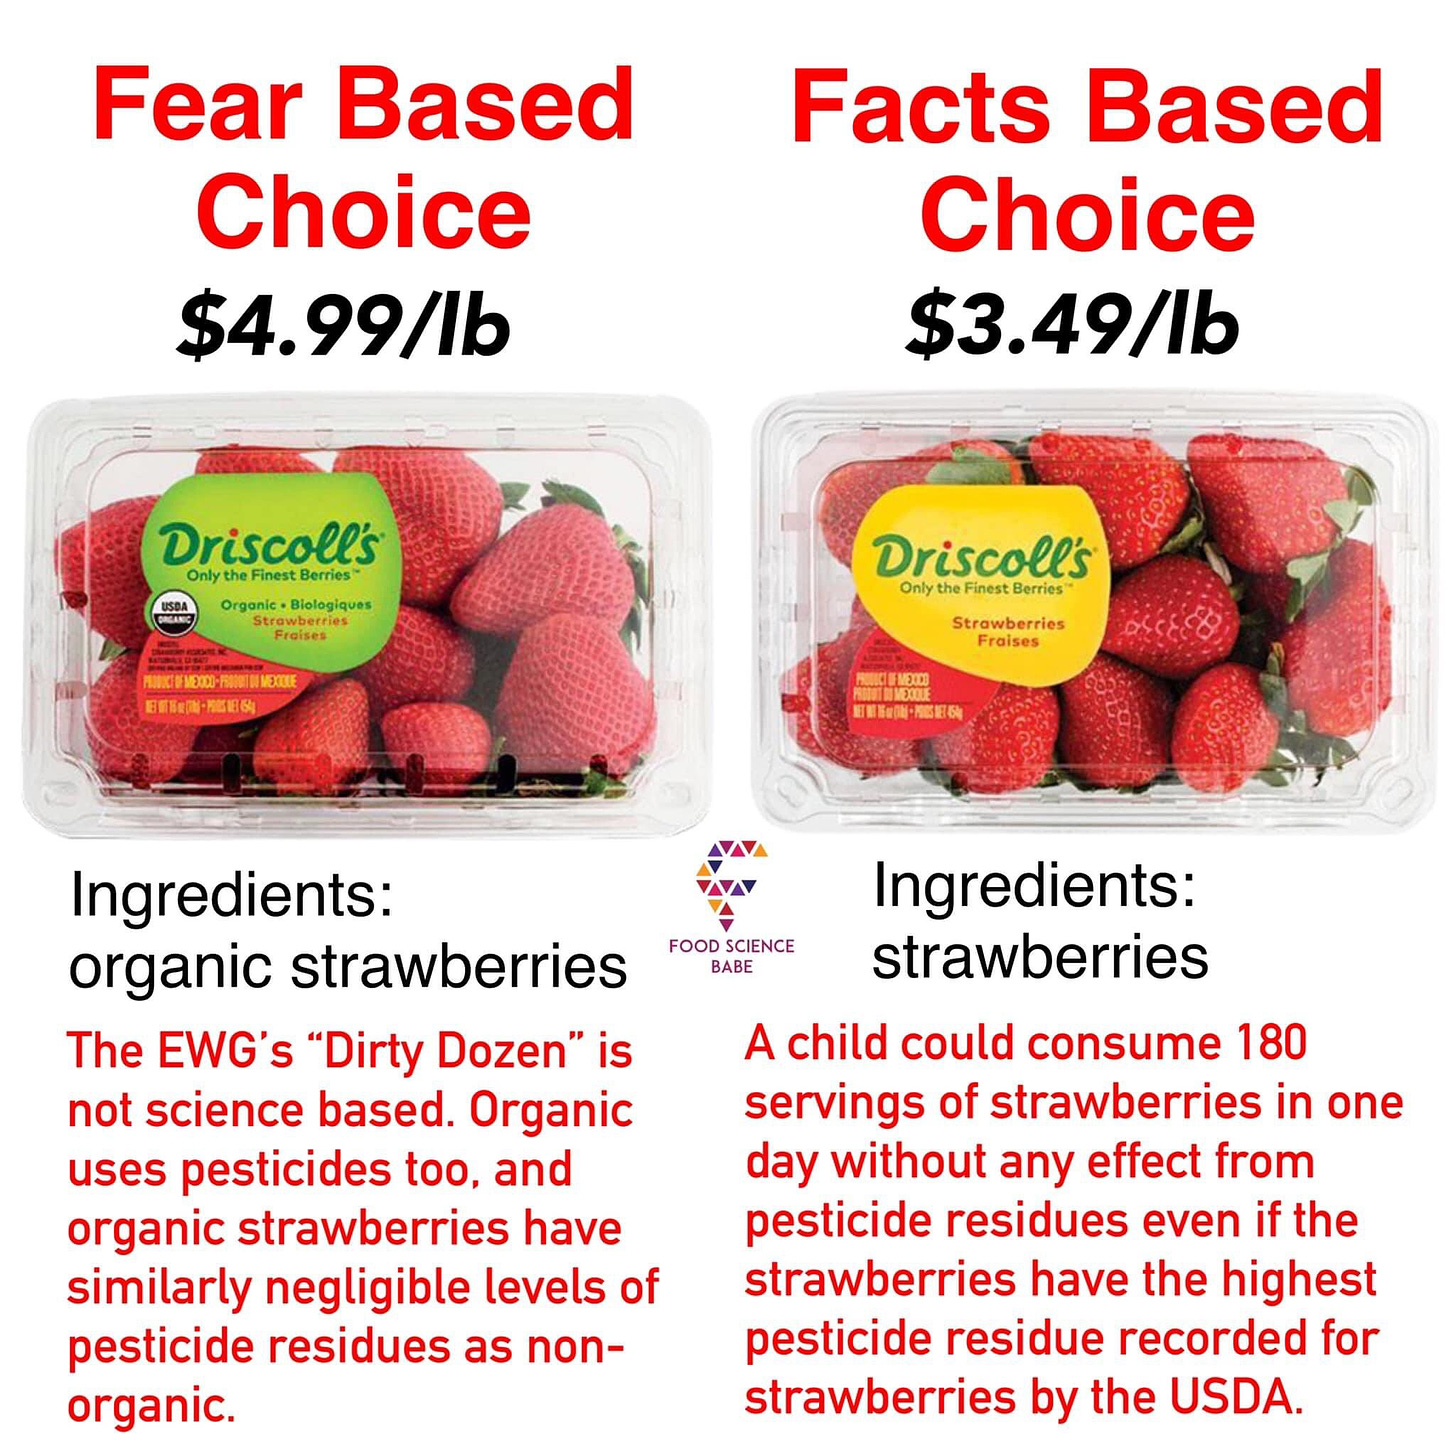 Food Science Babe meme. On left side: Fear Based Choice $4.99/lb pictured is a package of organic strawberries that says underneath, Ingredients: organic strawberries the EWG's “Dirty Dozen” is not science based. Organic uses pesticides too, and organic strawberries have similarly negligible levels of pesticide residues as non-organic. On right side: Facts Based Choice $3.49/lb pictured is a package of conventional strawberries that says underneath, Ingredients: a child could consume 180 servings of strawberries in one day without any effect from pesticide residues even if the strawberries have the highest pesticide residue recorded for strawberries by the USDA.